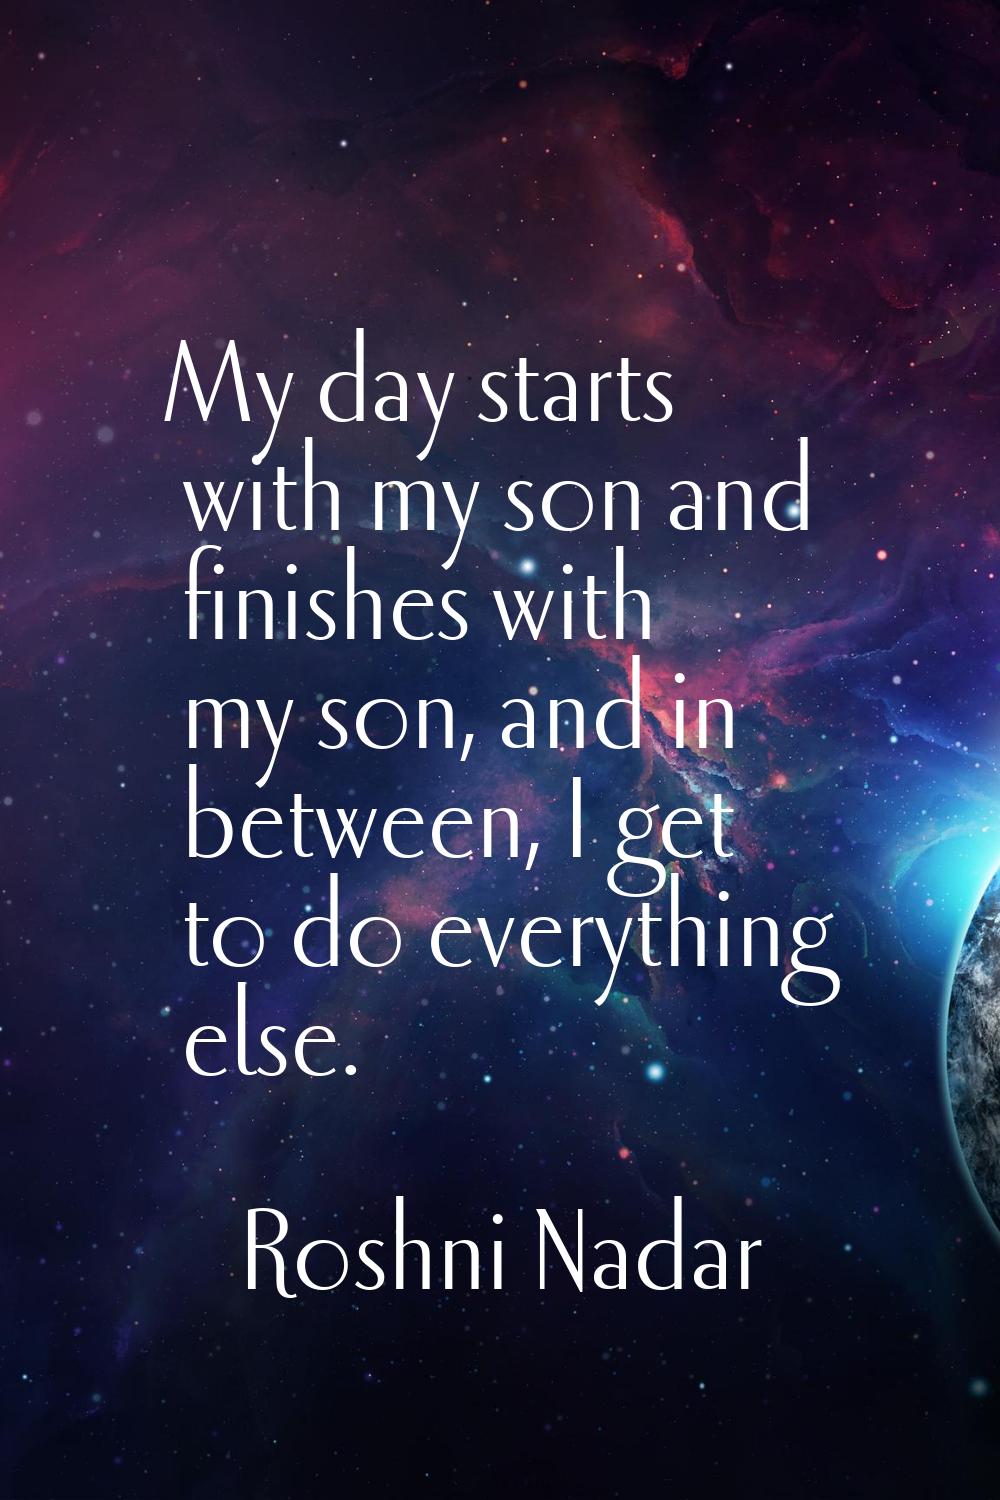 My day starts with my son and finishes with my son, and in between, I get to do everything else.